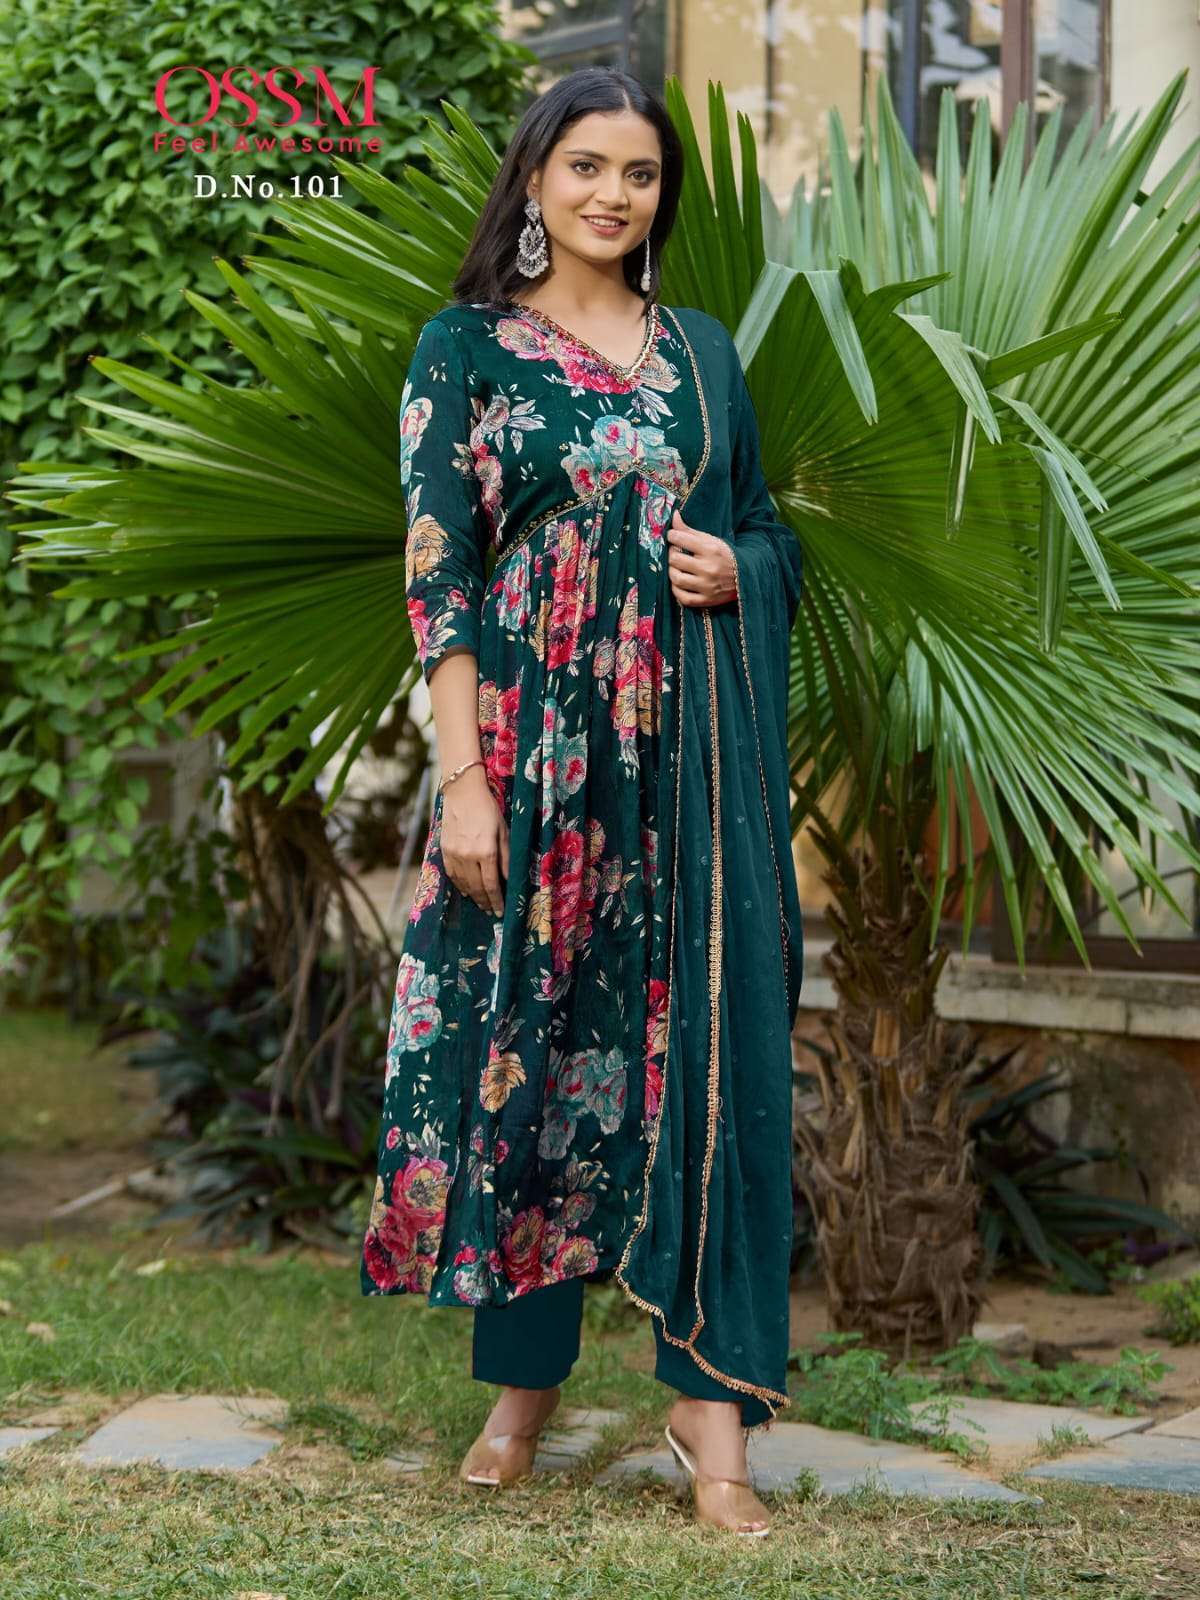 Buy SDC Collections Classy Pure Printed Cotton Kurti Pant Dupatta Set  Highlighted with Sequin and moti Work on Yoke 2563_46 at Amazon.in